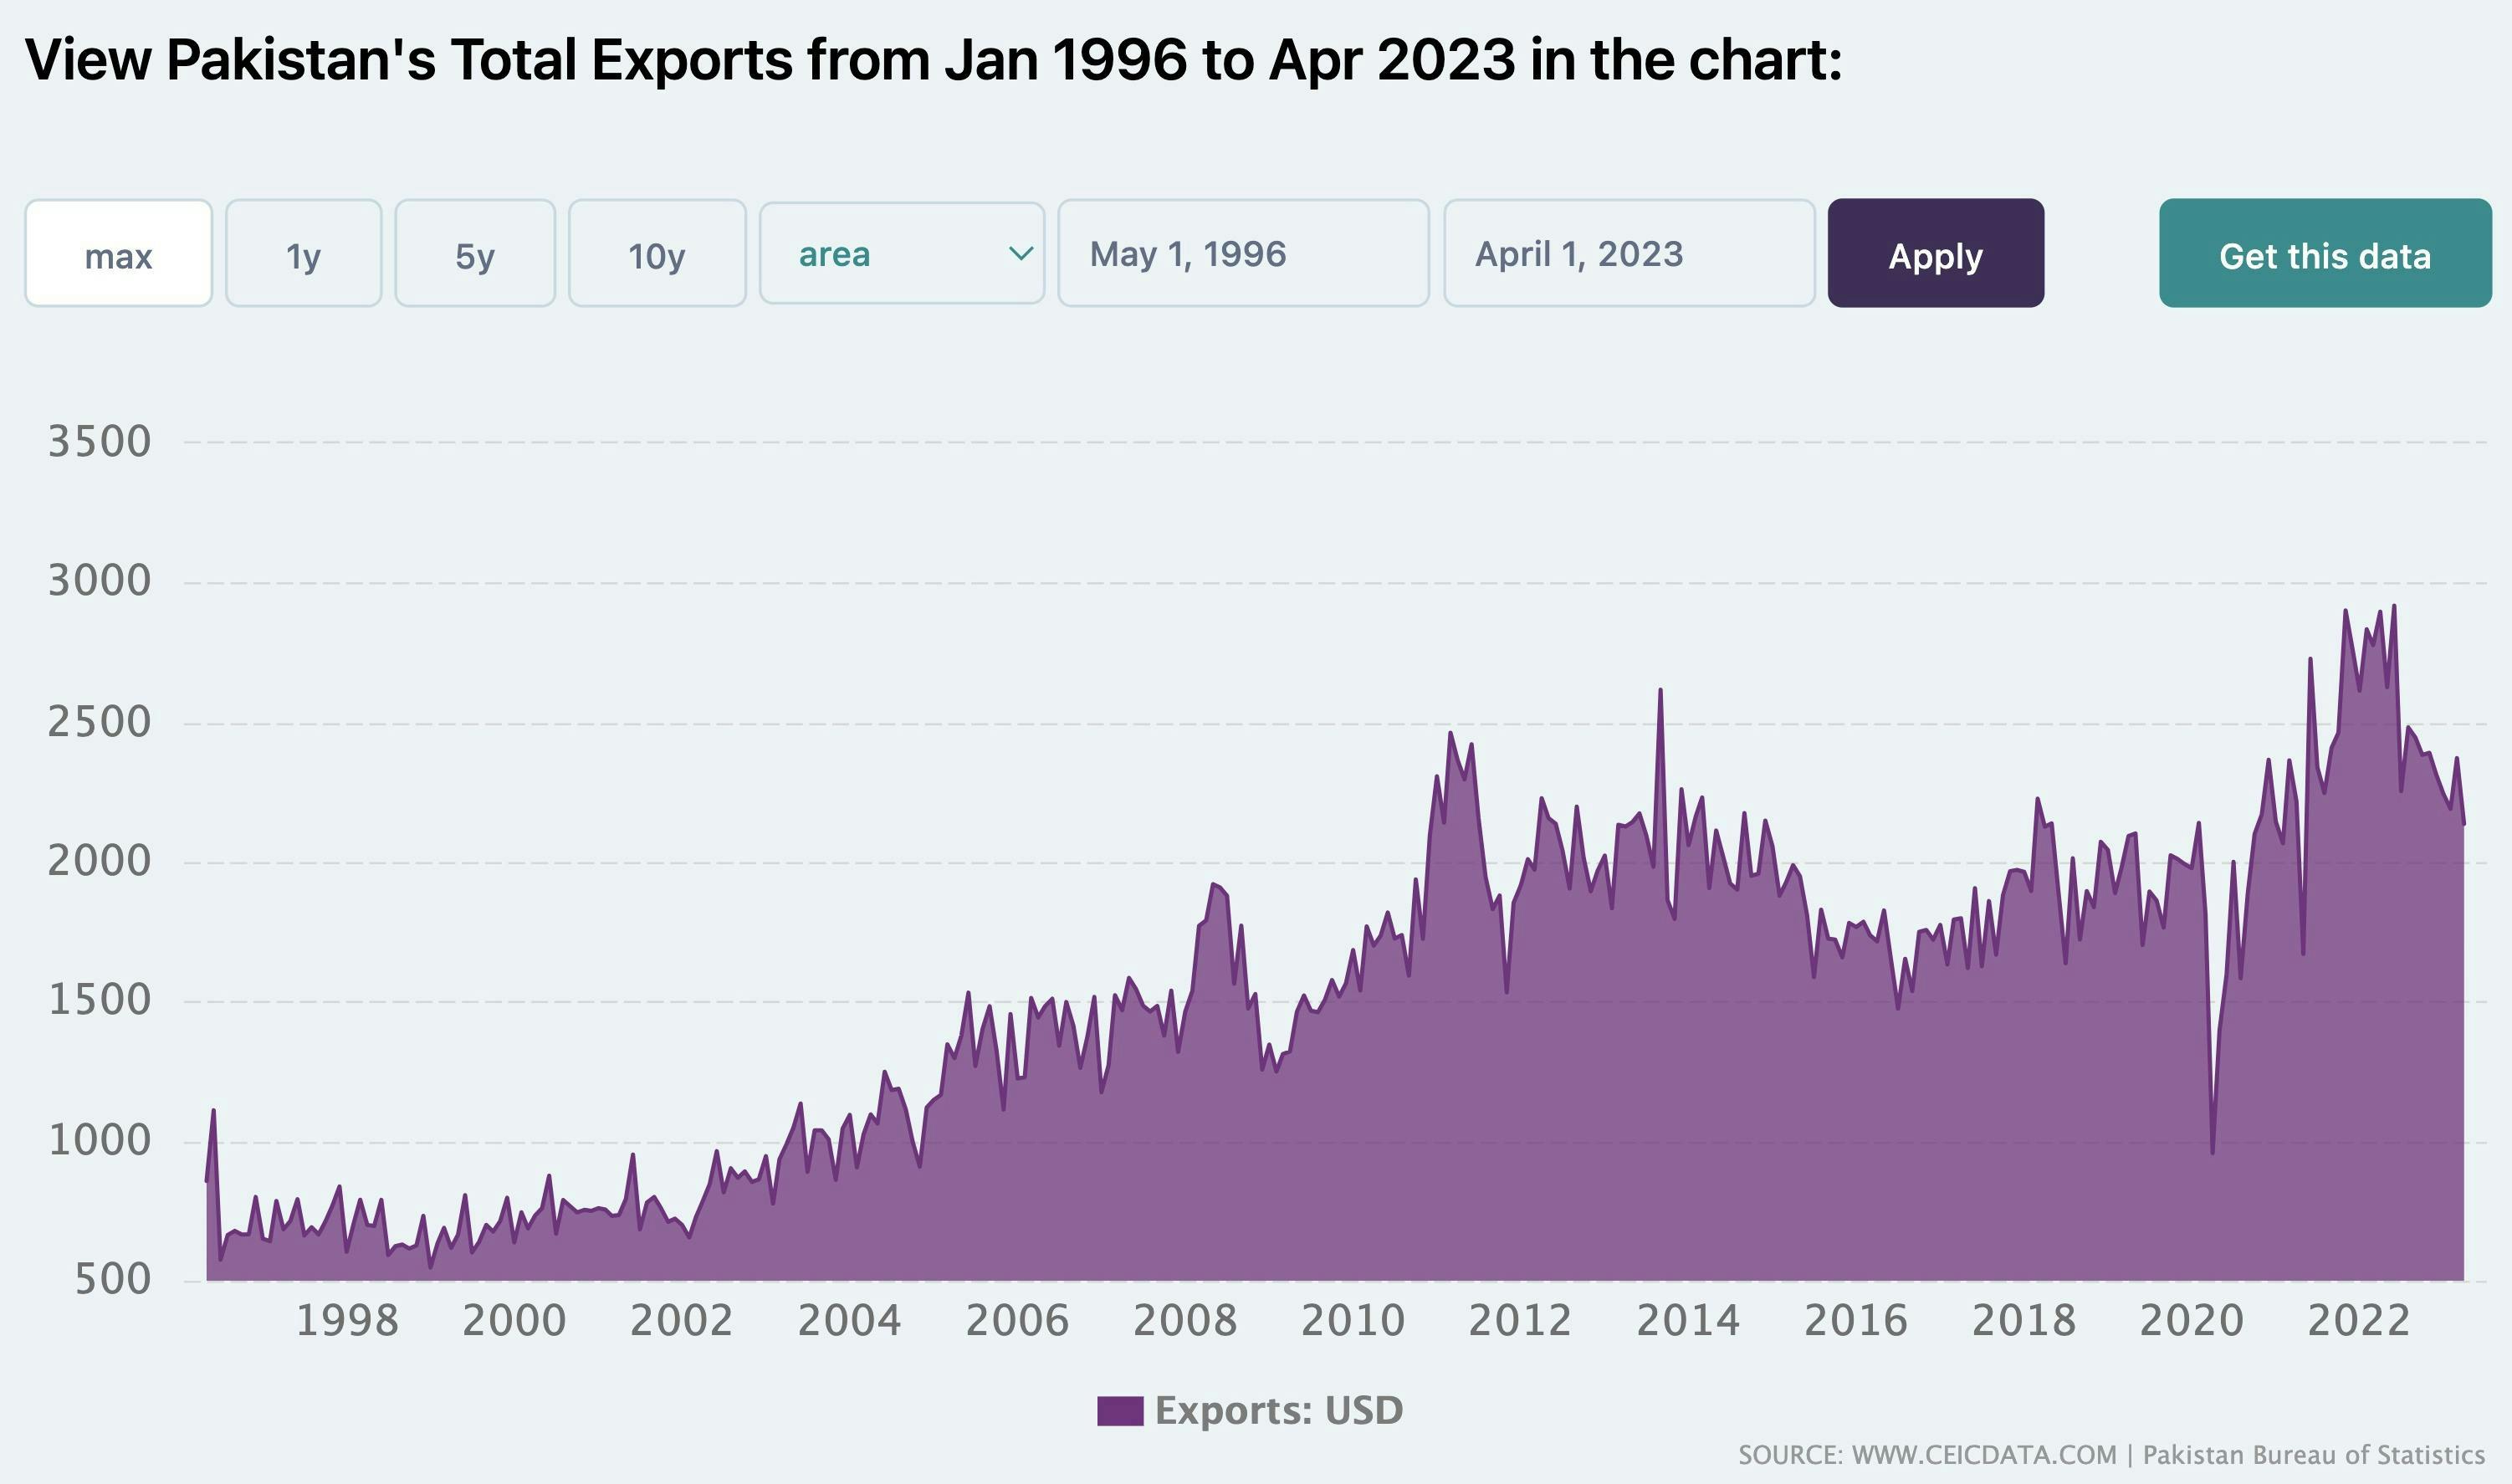 Pakistan's total exports from 1996 to 2023